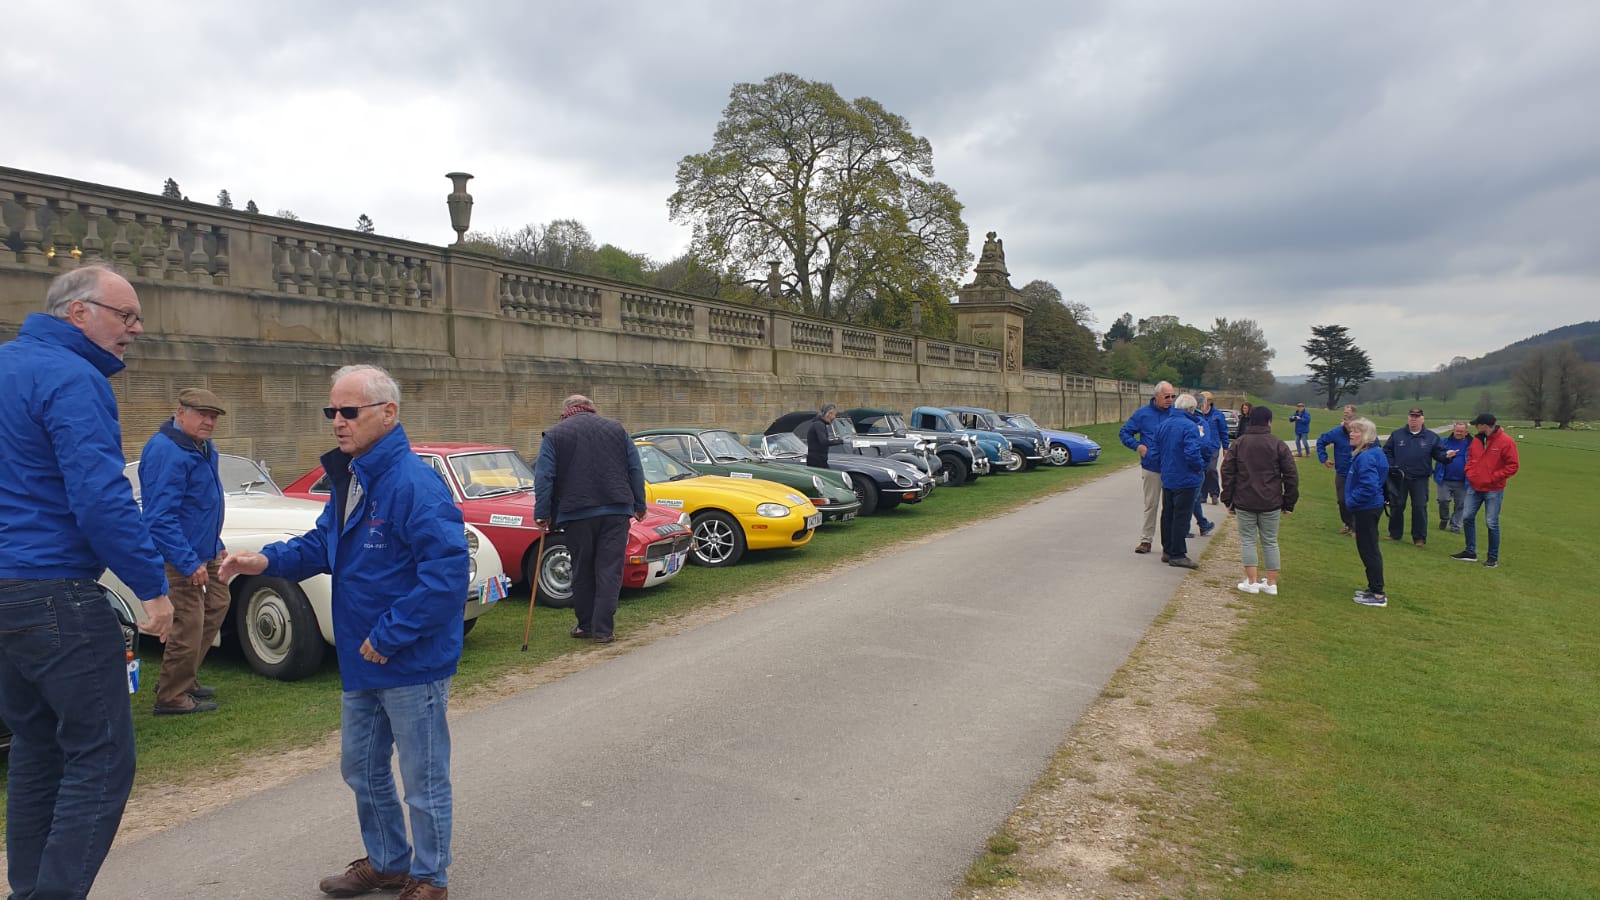 Nigel Allen VW - Discussing next route at Chatsworth